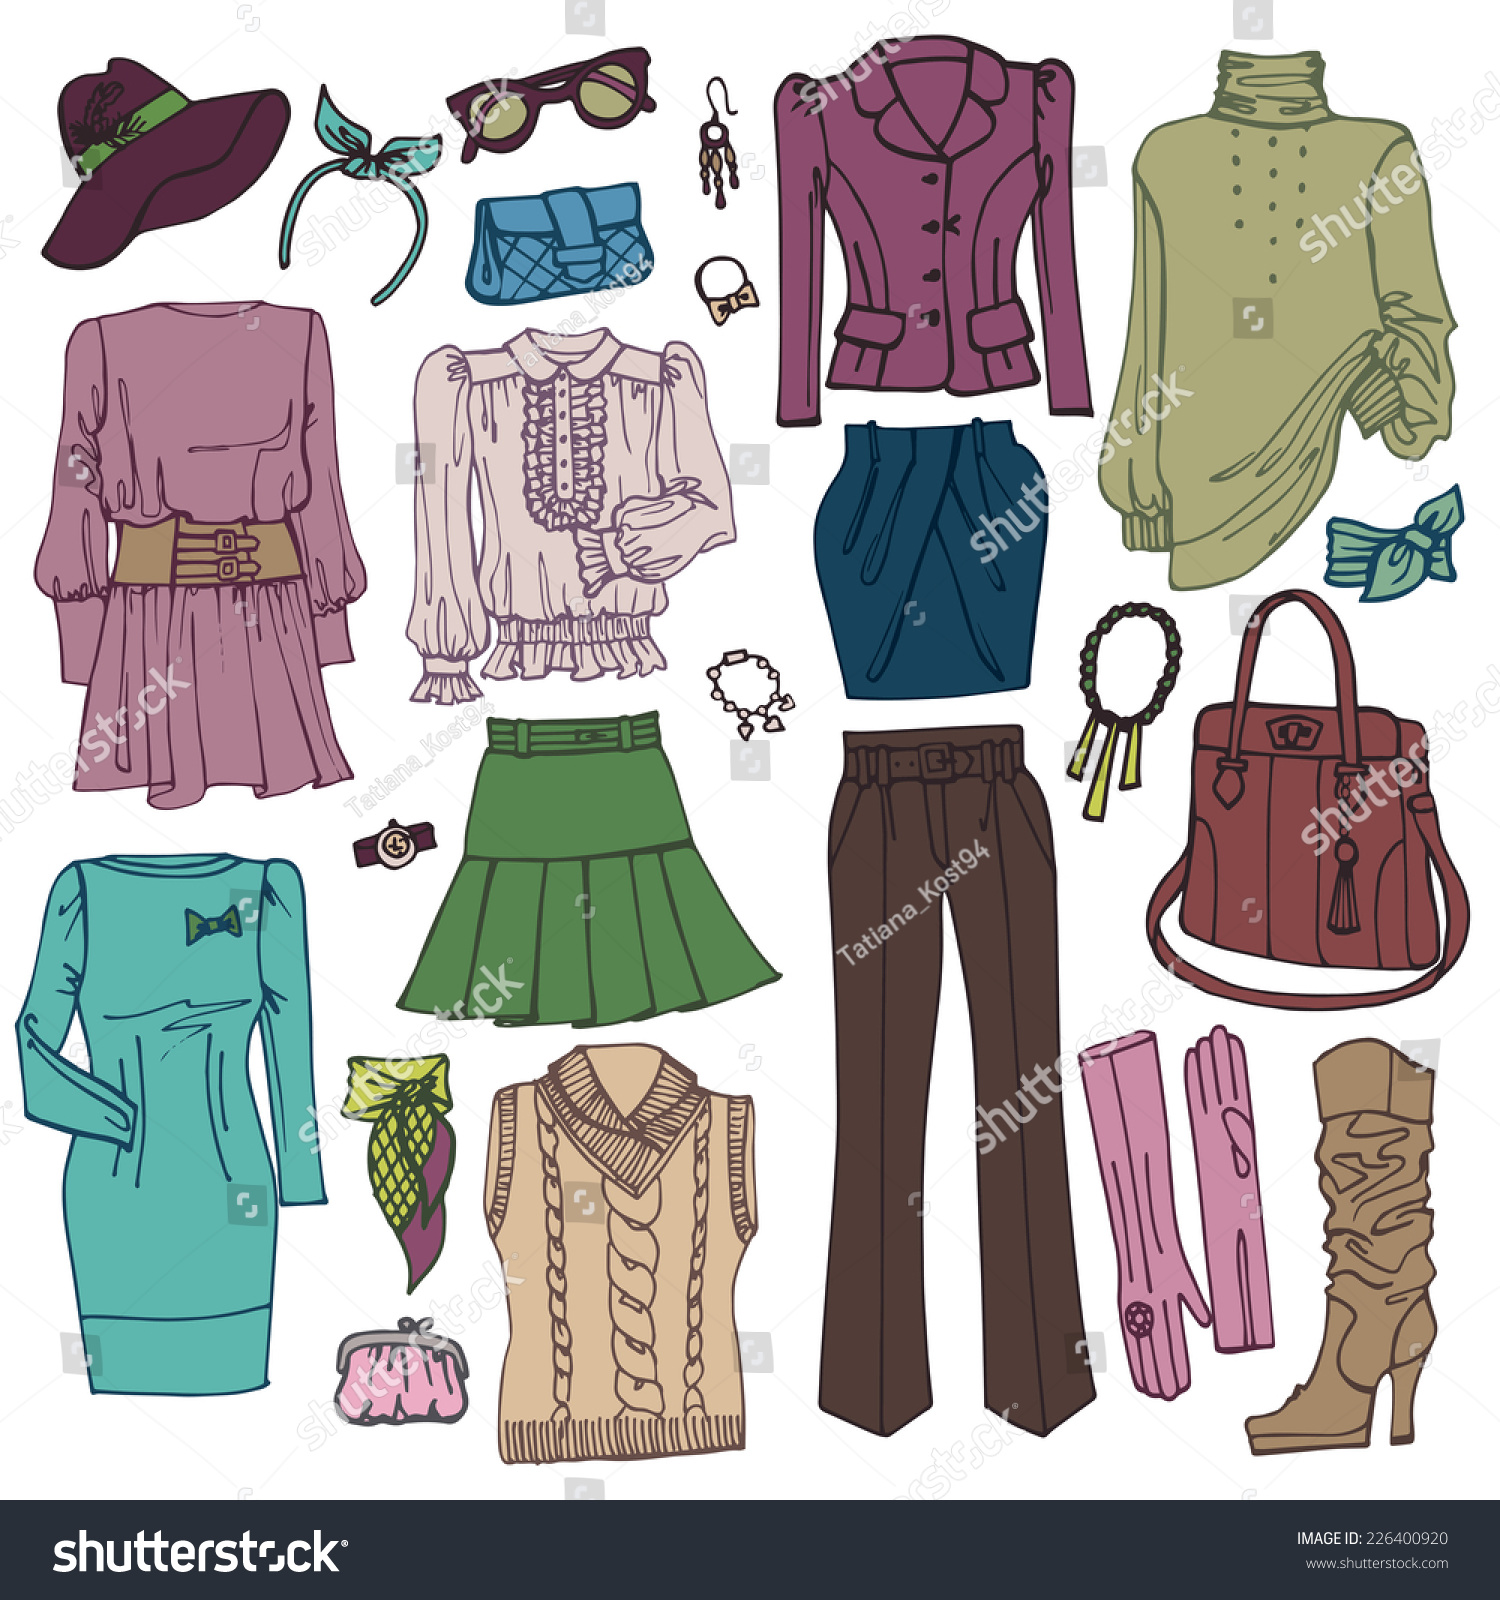 Colored Fashionable Woman Clothing And Accessories Set On Sketchy Style ...